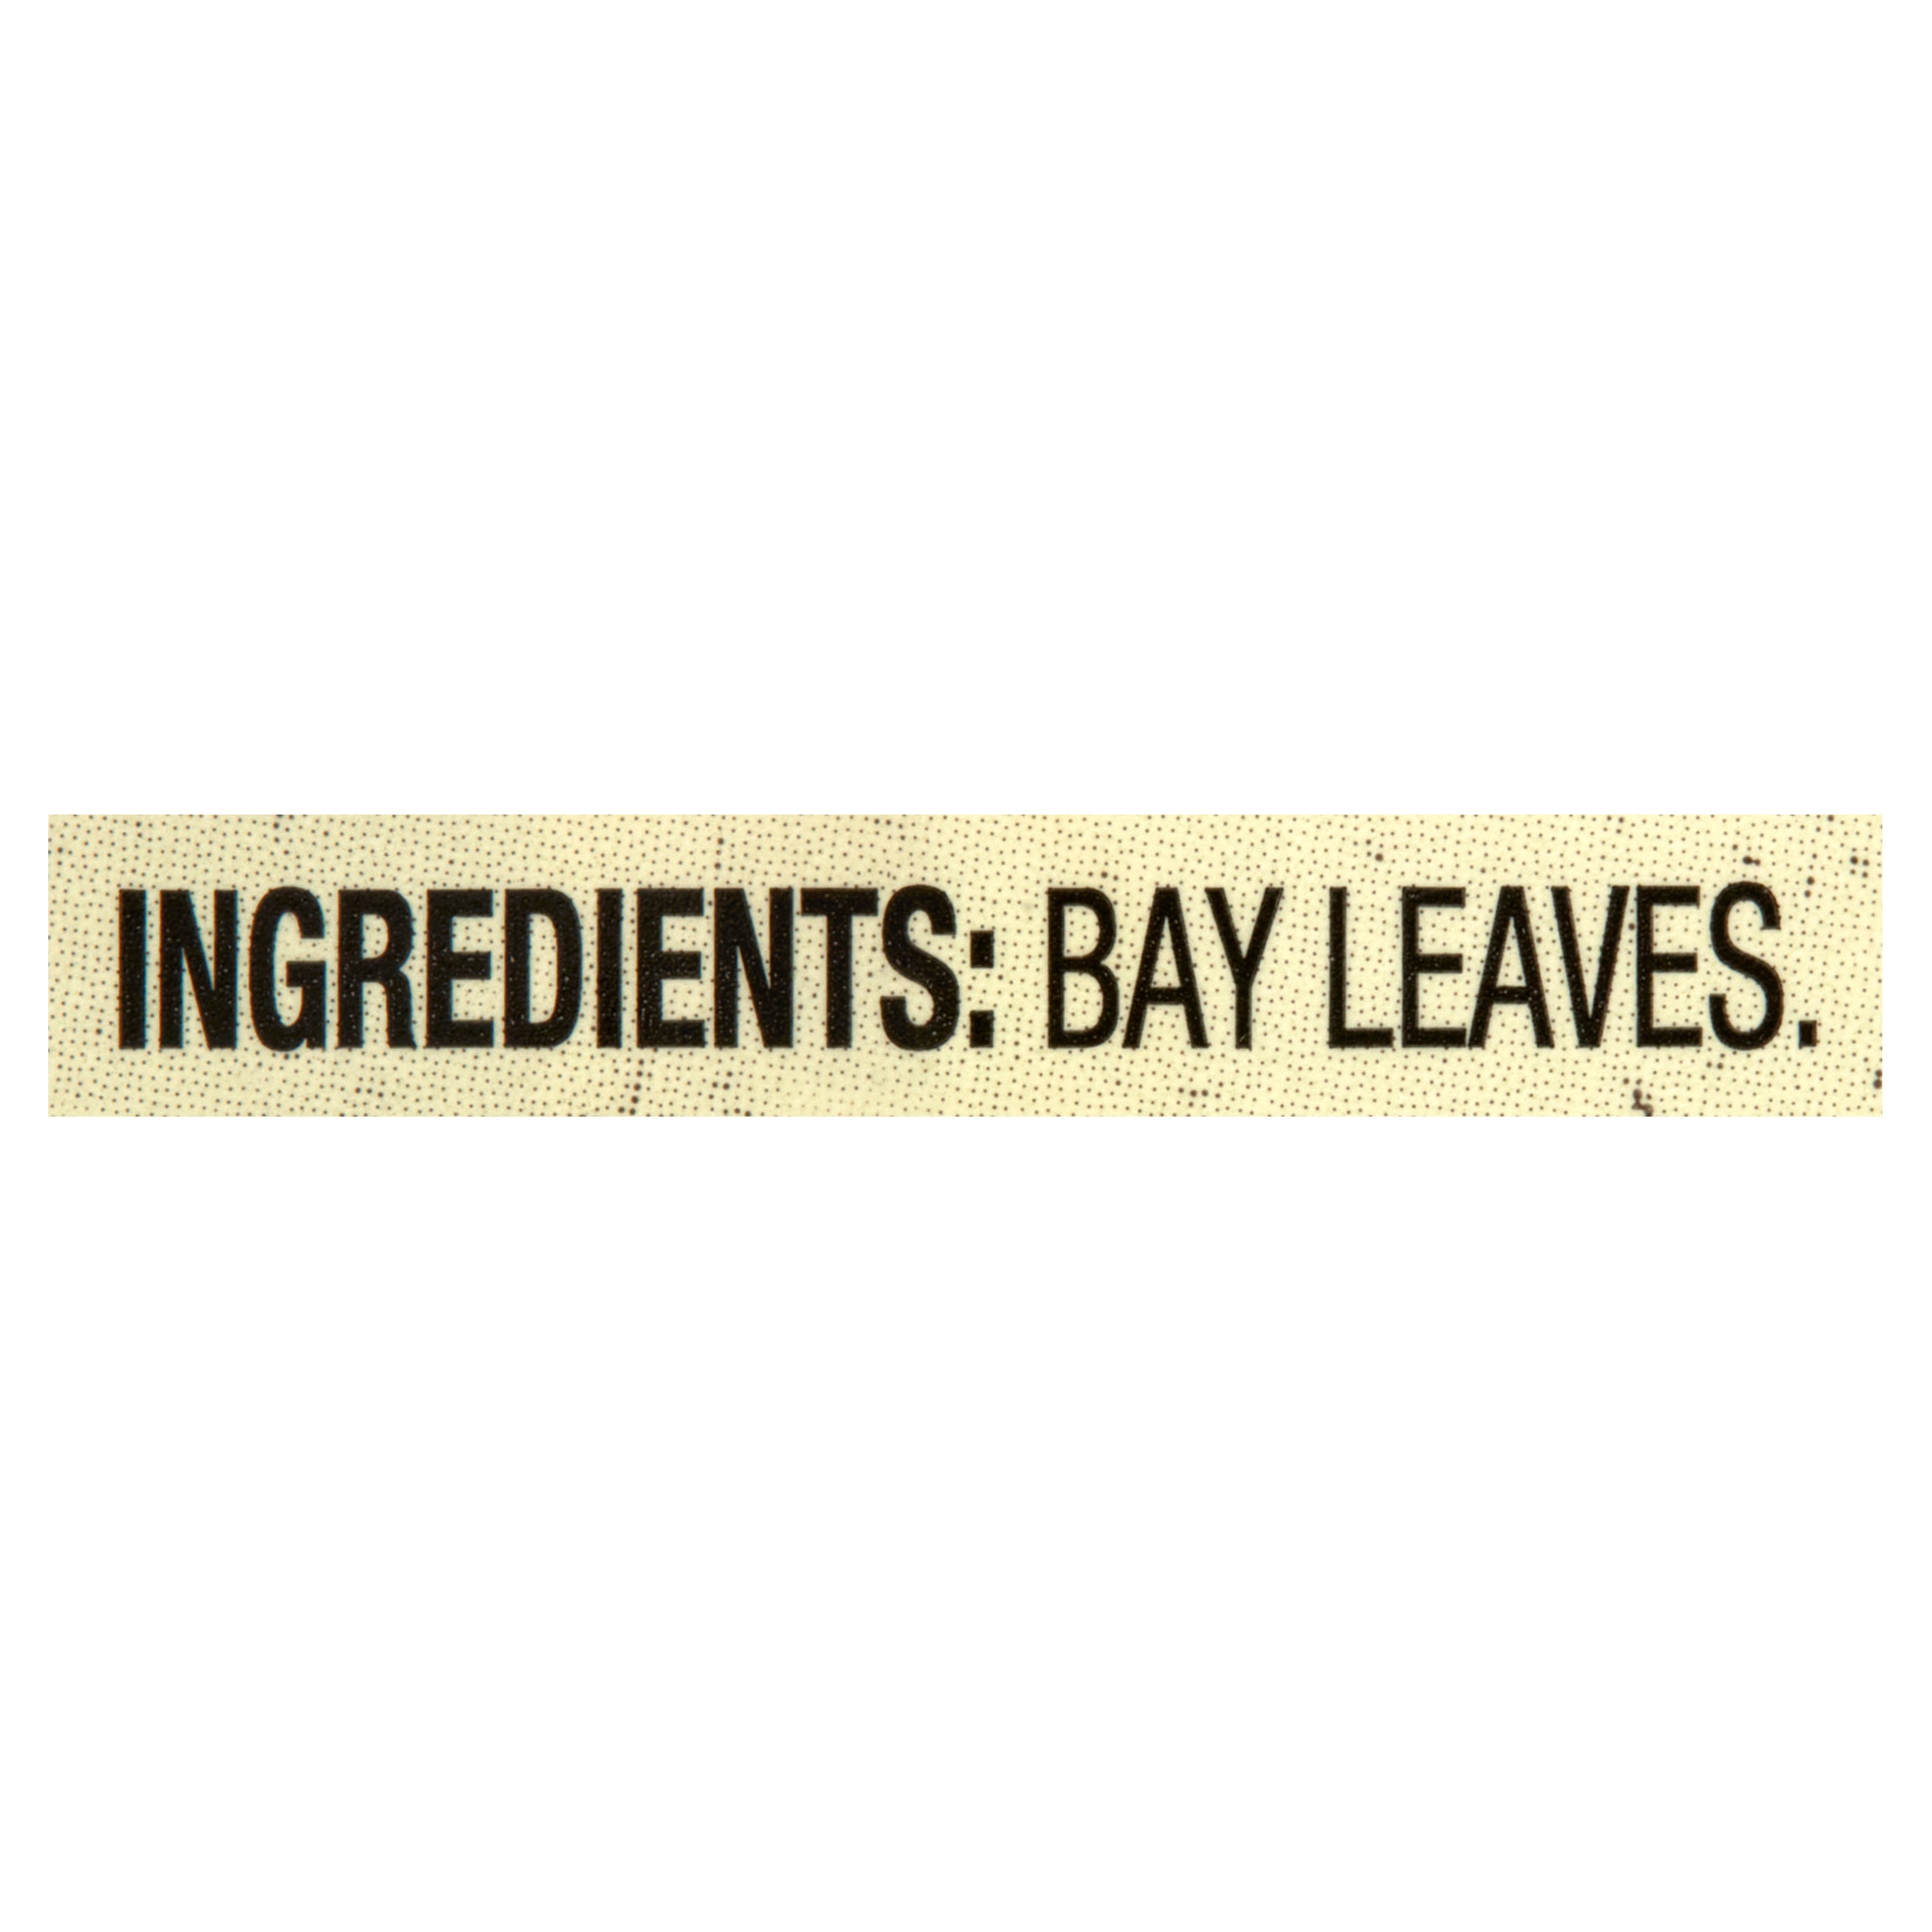 Great Value Bay Leaves, 0.12 oz - image 5 of 11